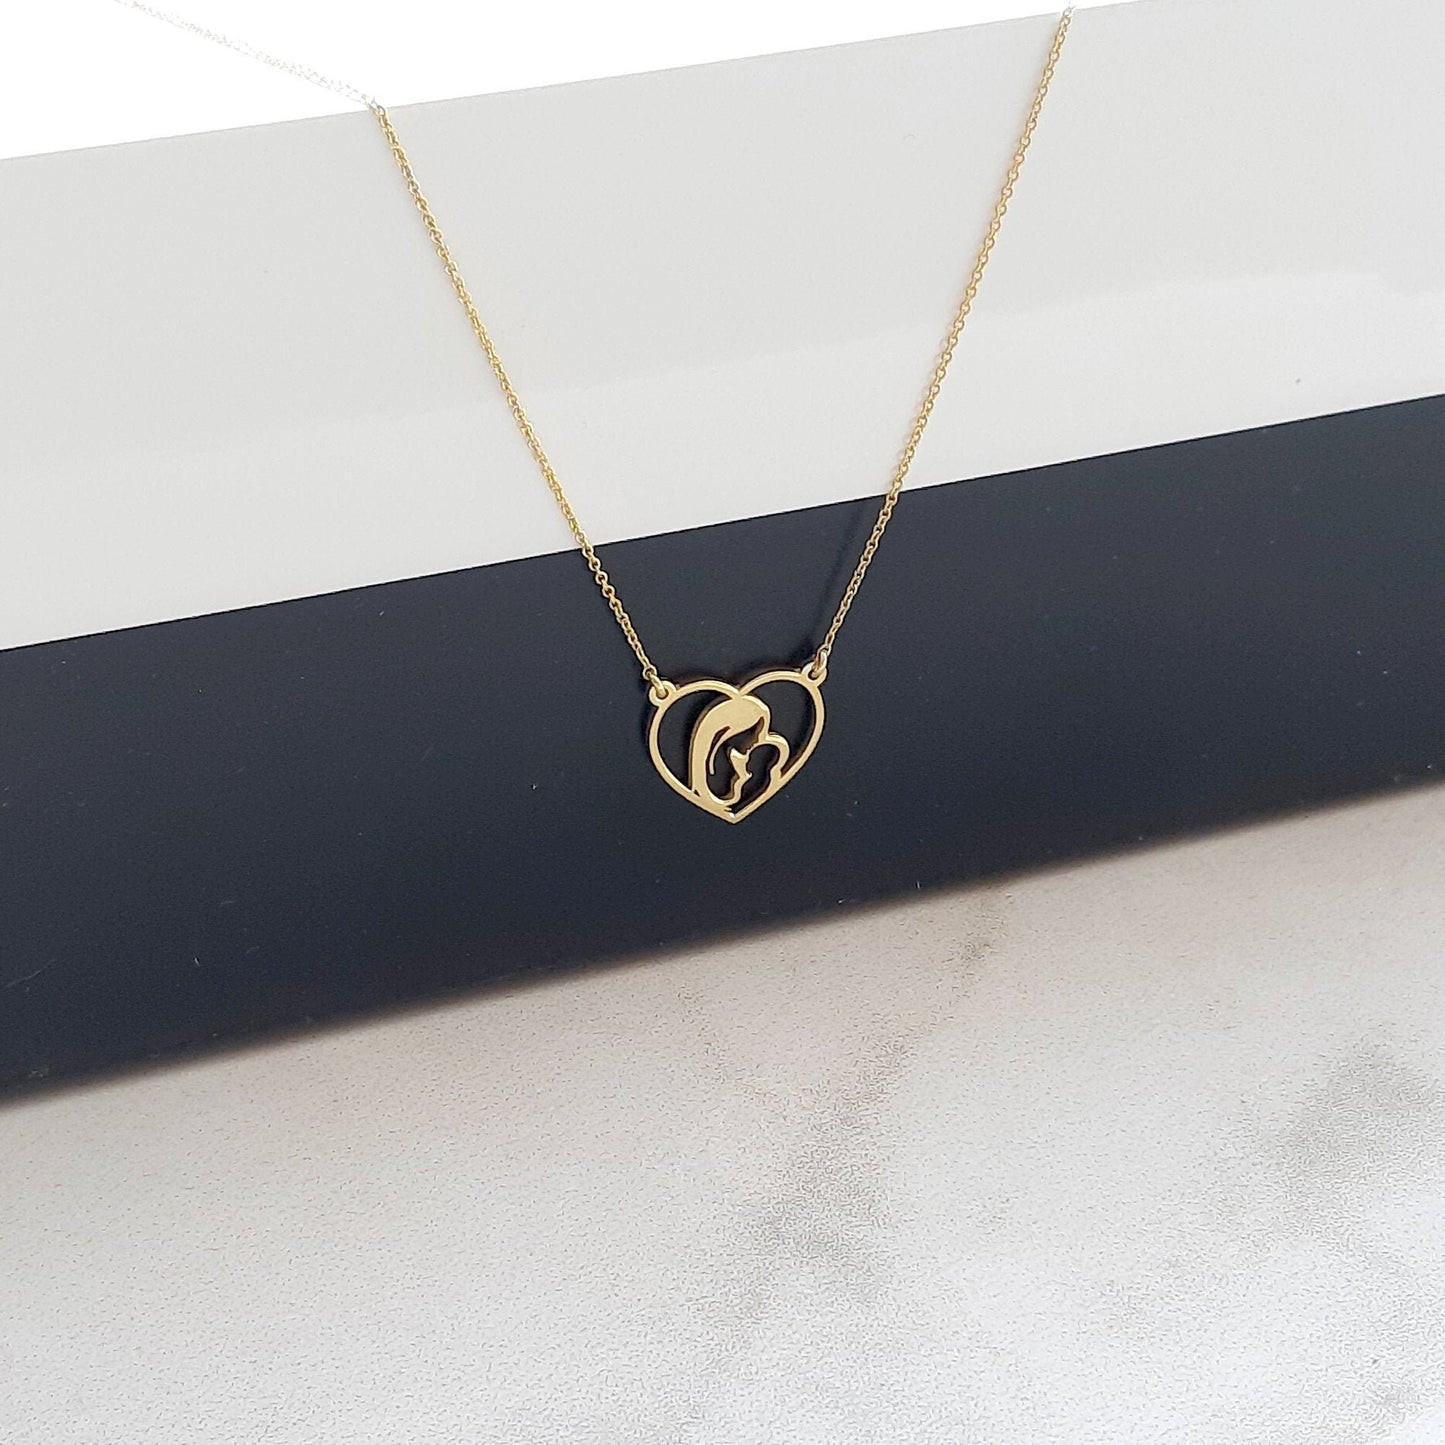 Mother and baby necklace in 14k White gold, Dainty 14k solid gold thin chain, new mom necklace, everyday necklace , unique gift for her